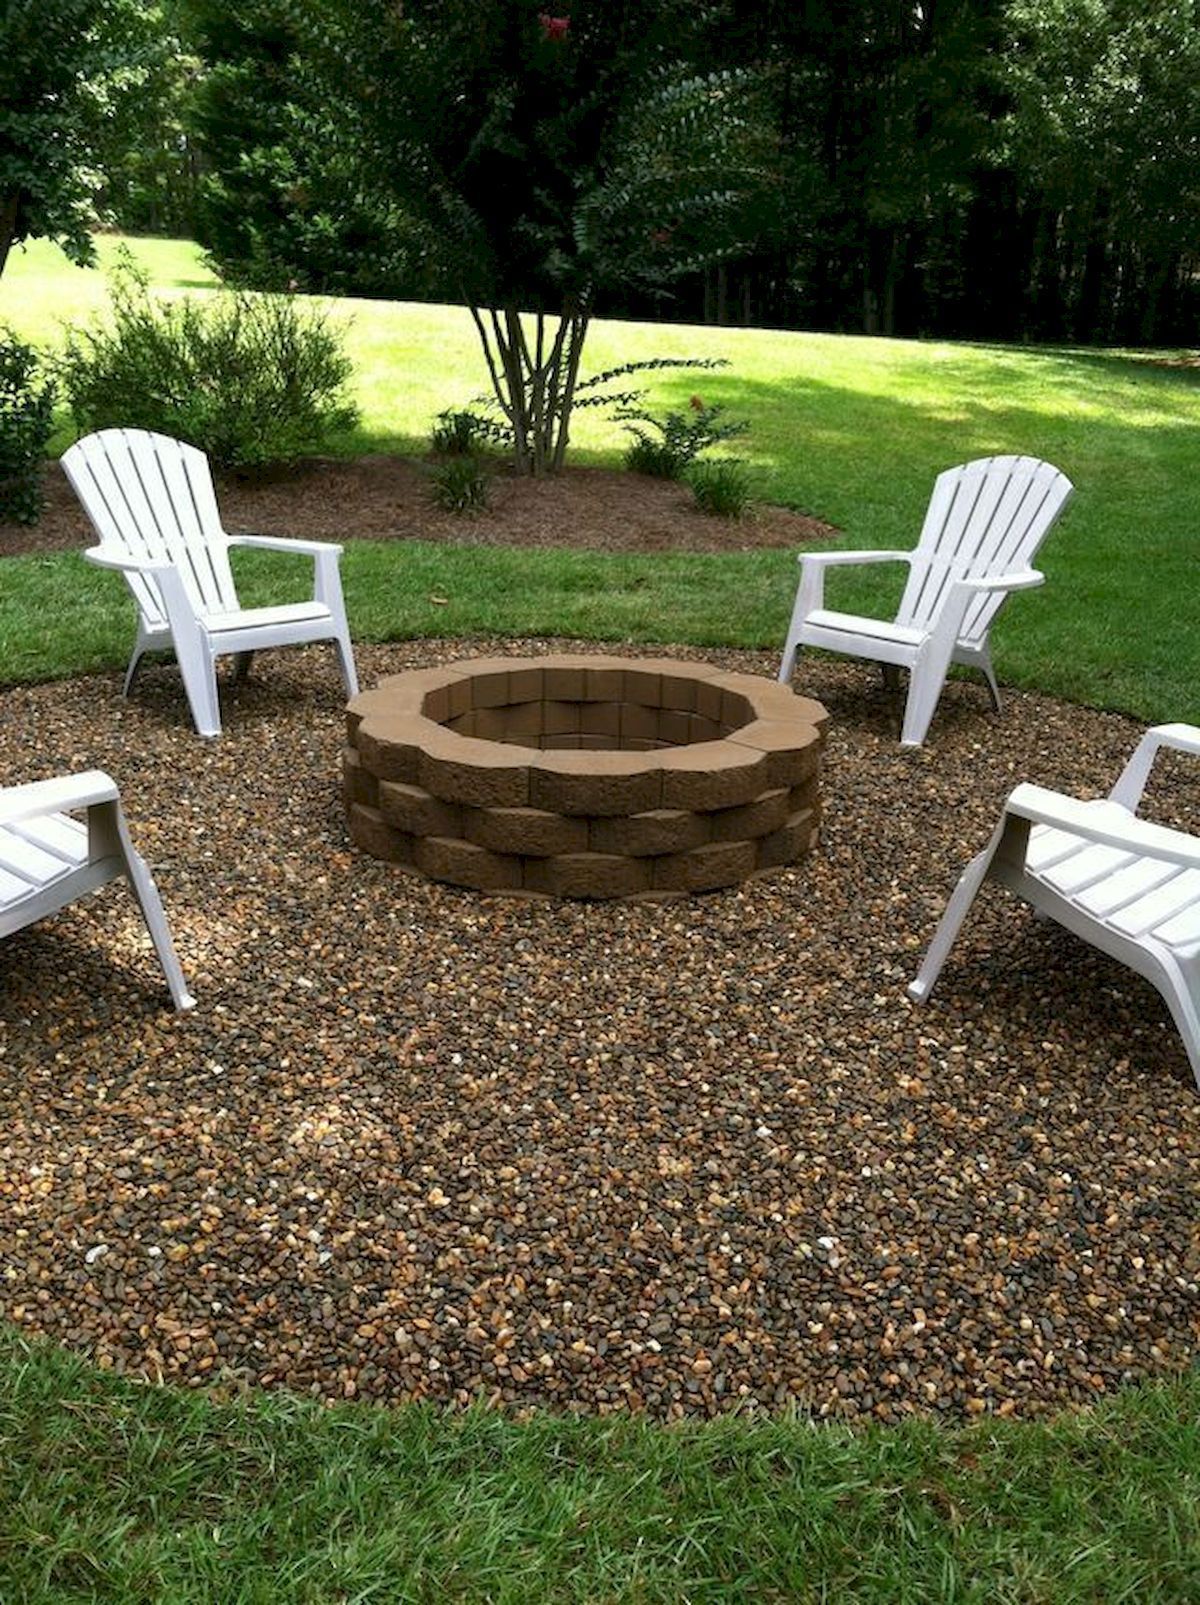 35 Great Fire Pit Designs for Your Gardens and Patios -   13 garden design Rectangular fire pits ideas